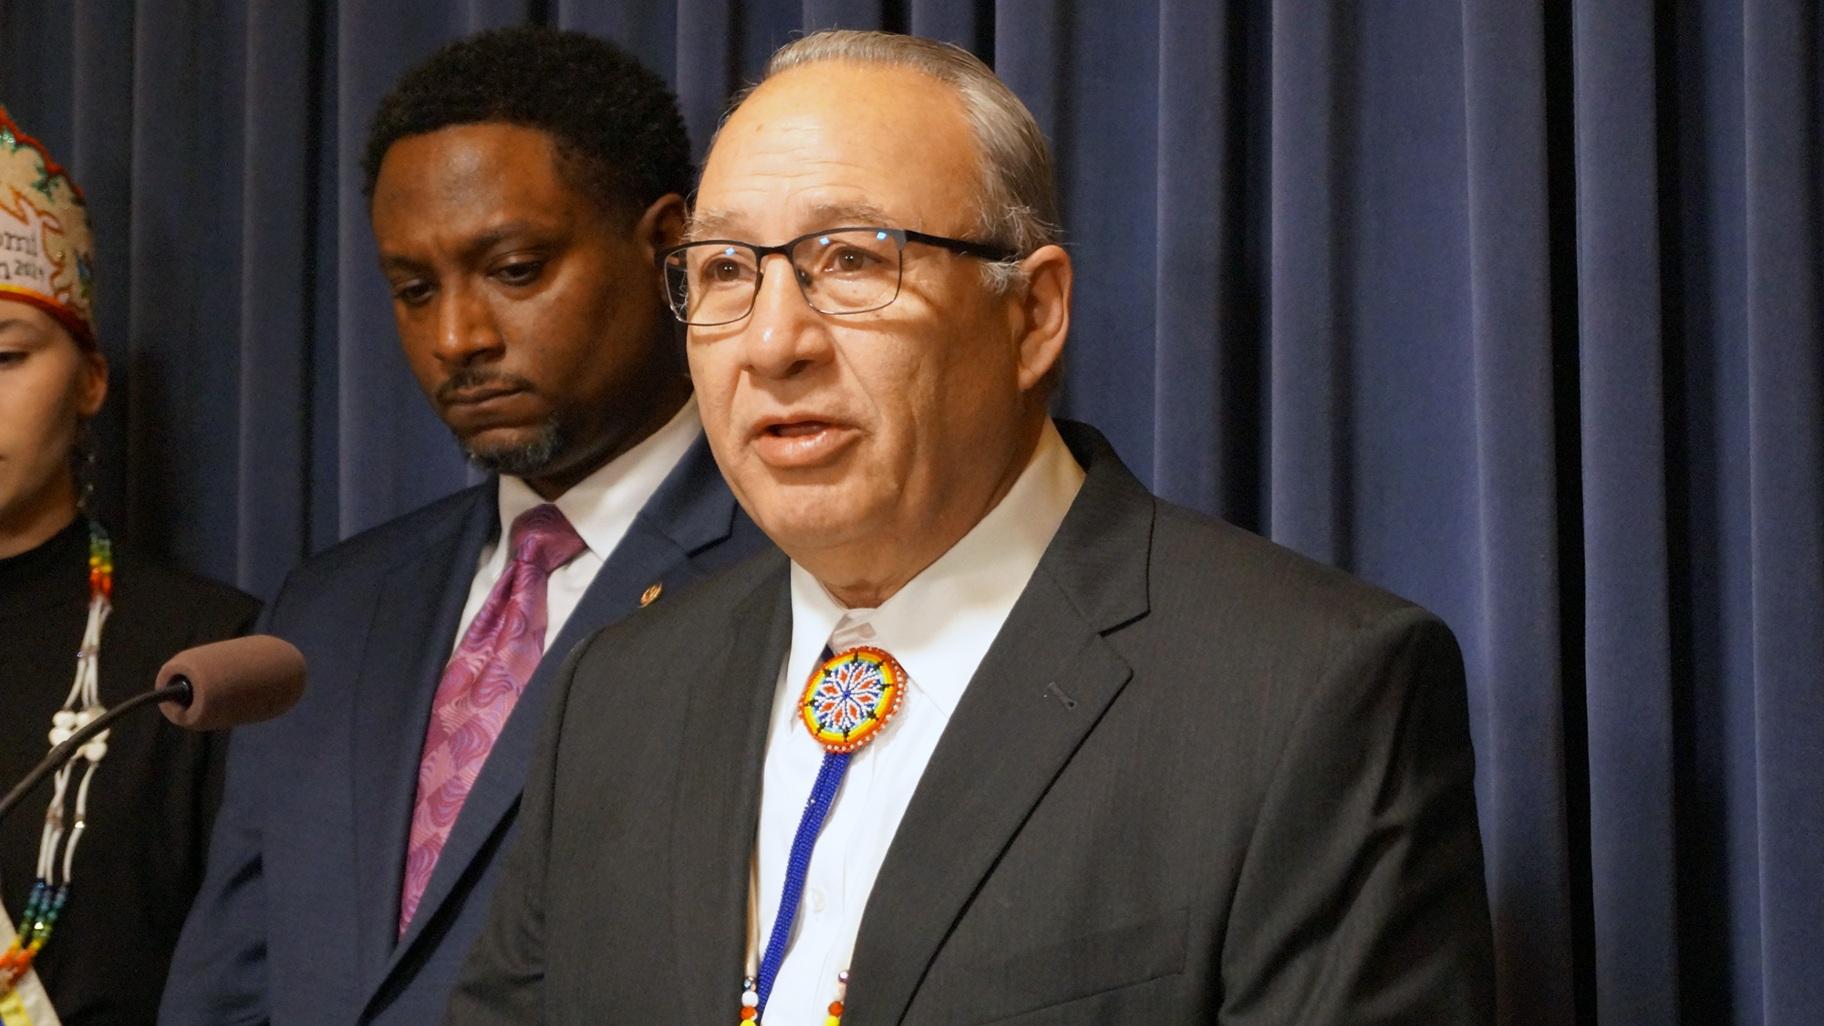 Joseph “Zeke” Rupnick, tribal chairman of the Prairie Band Potawatomi Nation, speaks at a news conference at the Illinois Capitol in February 2024. (Peter Hancock / Capitol News Illinois)